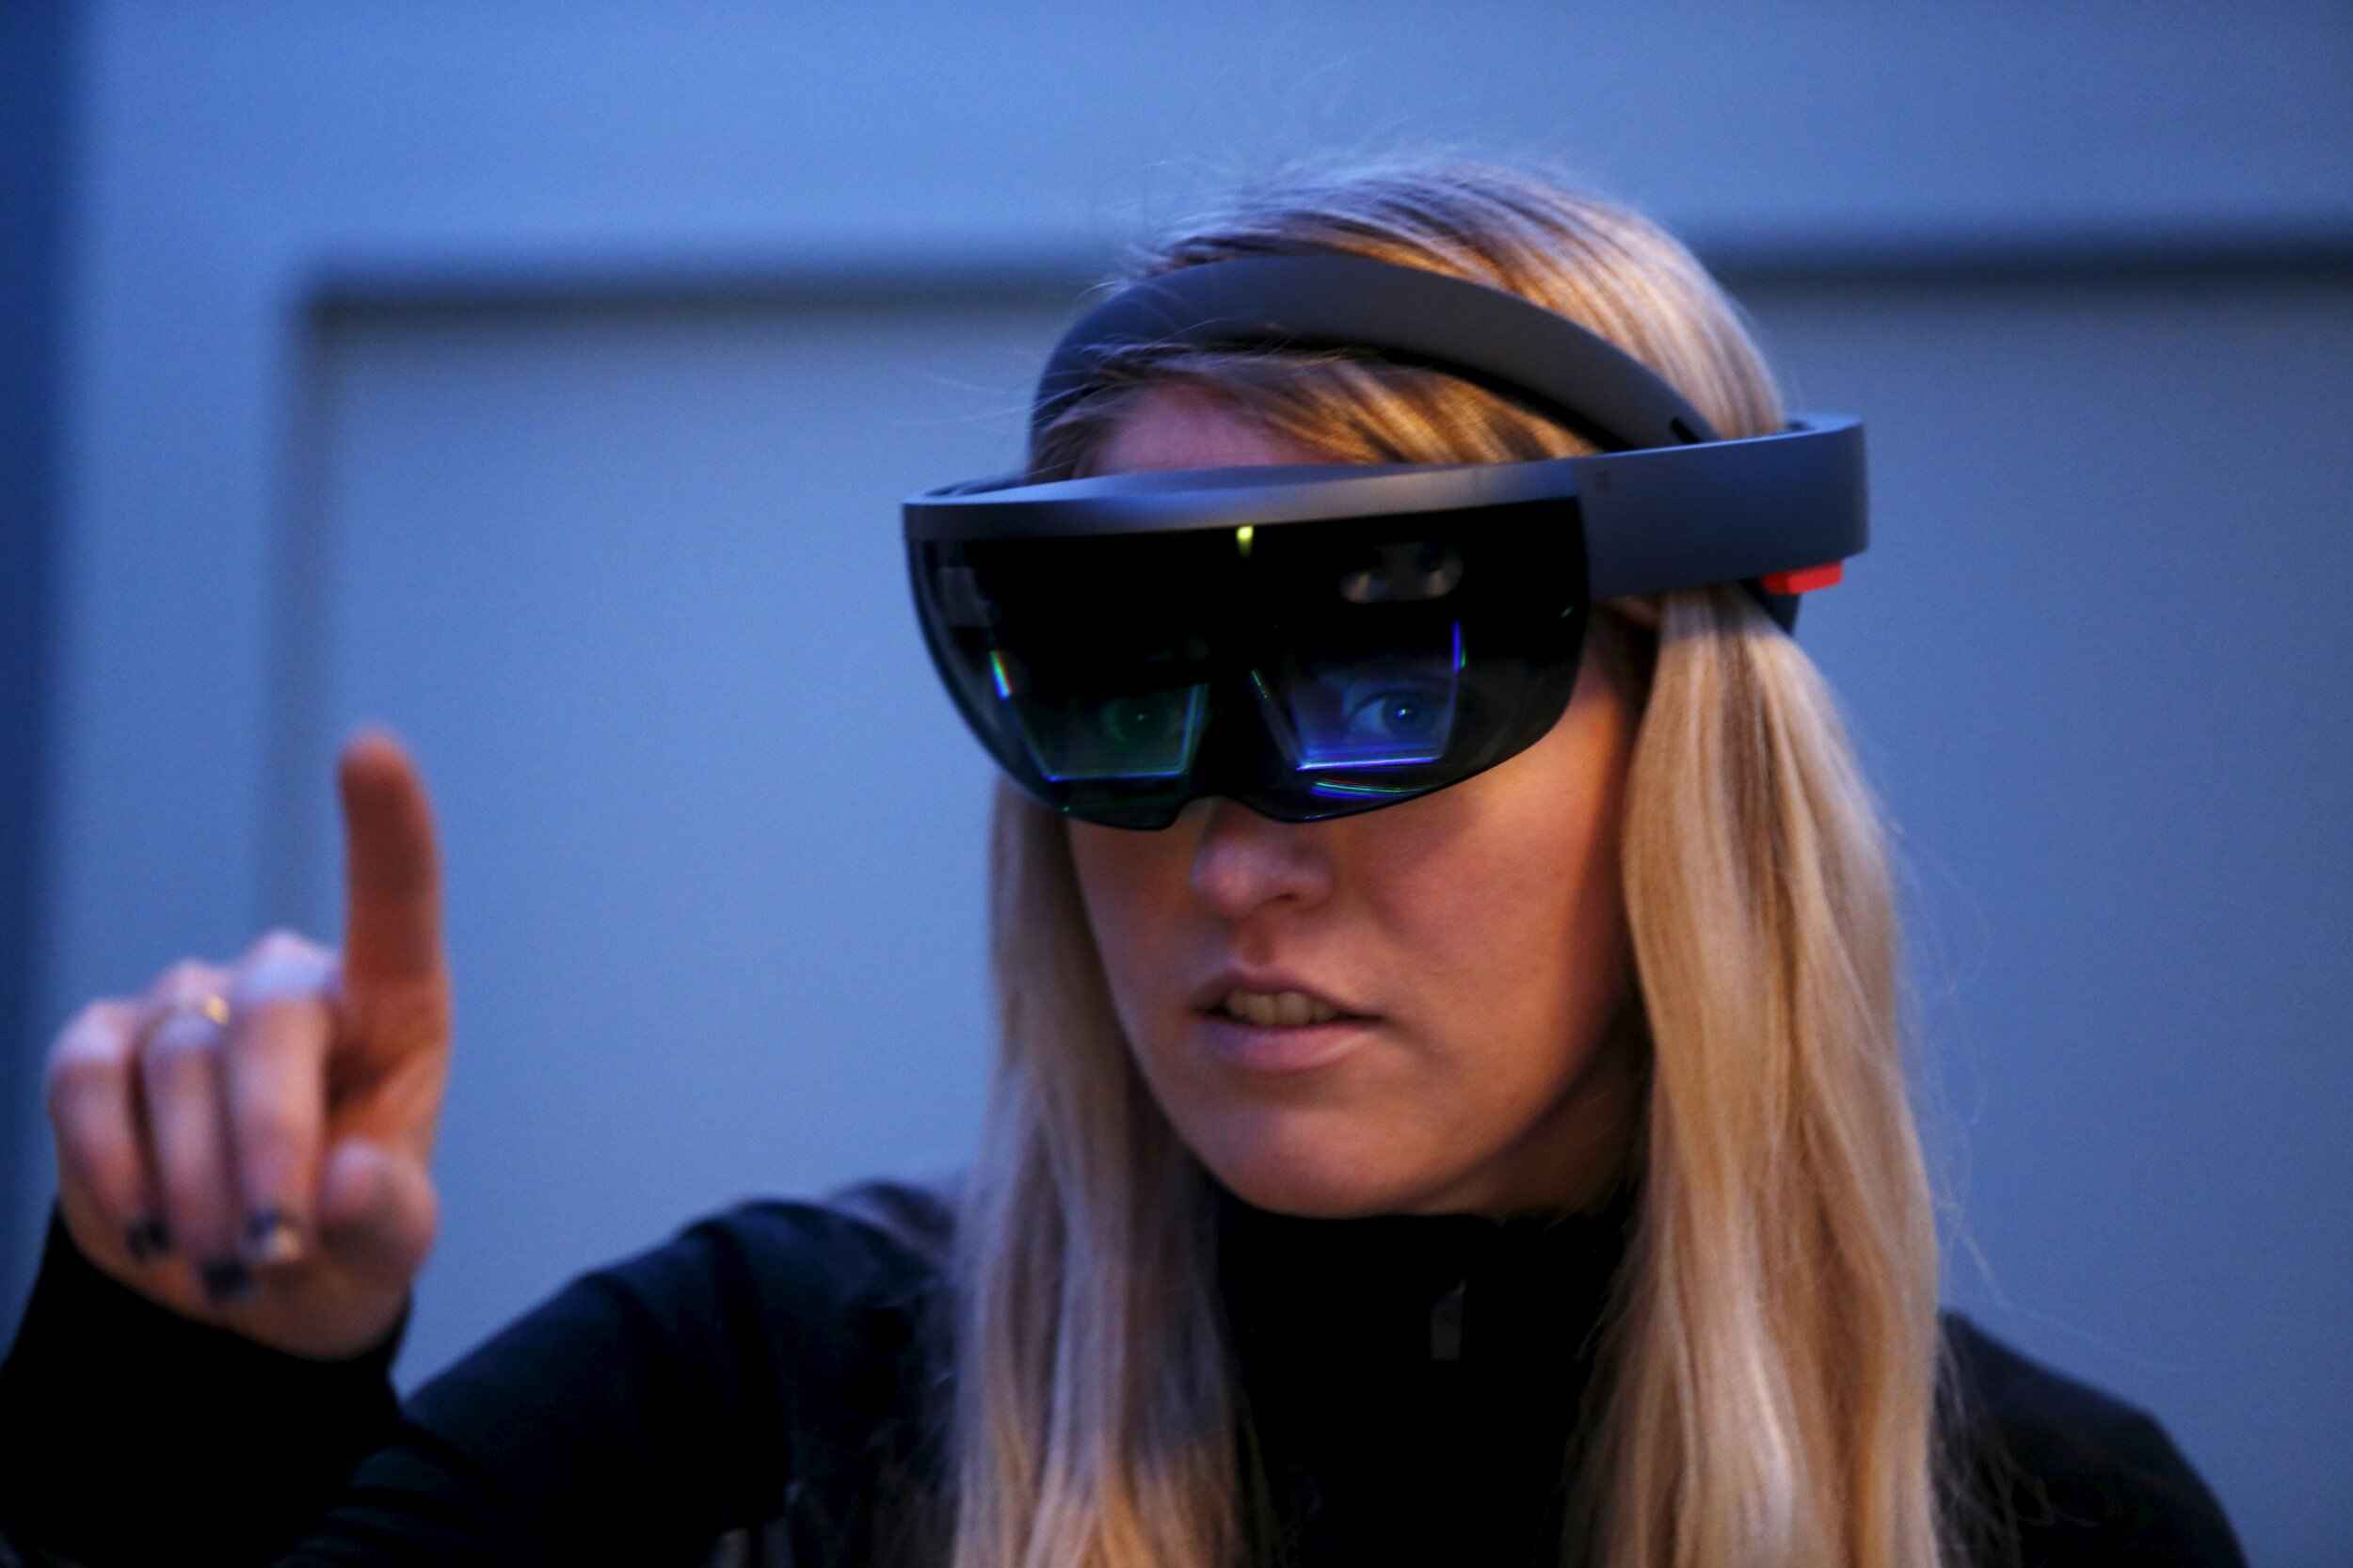 What Happened To The Microsoft HoloLens